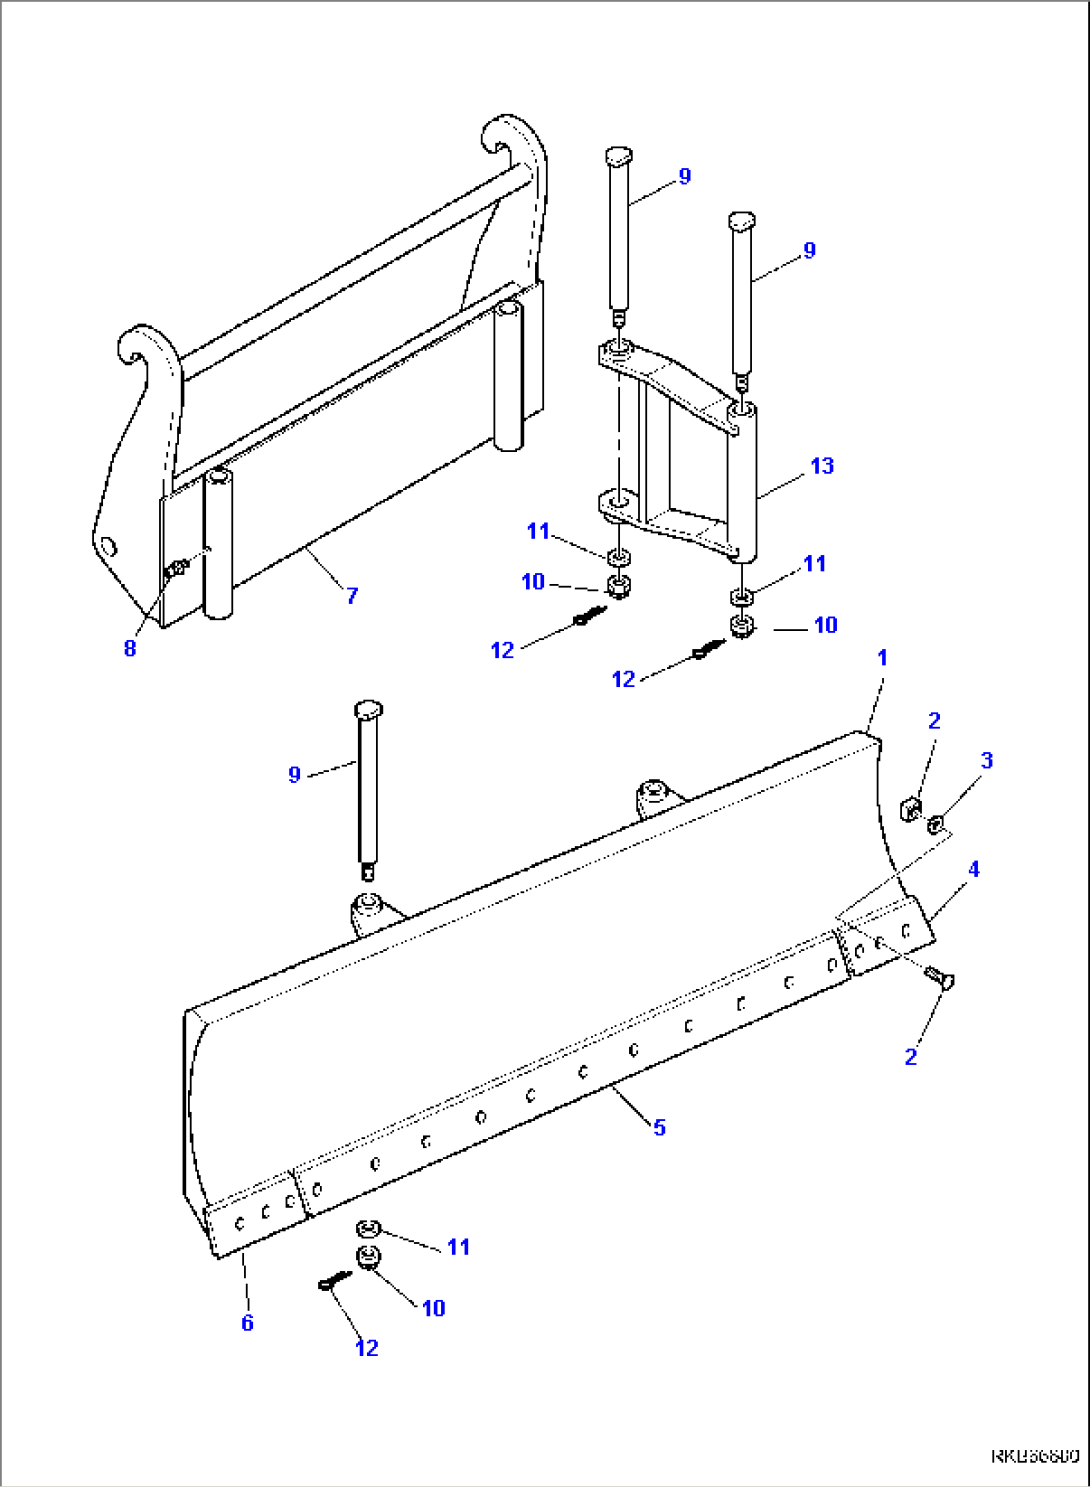 BLADE (WITH MECHANICAL QUICK COUPLING)